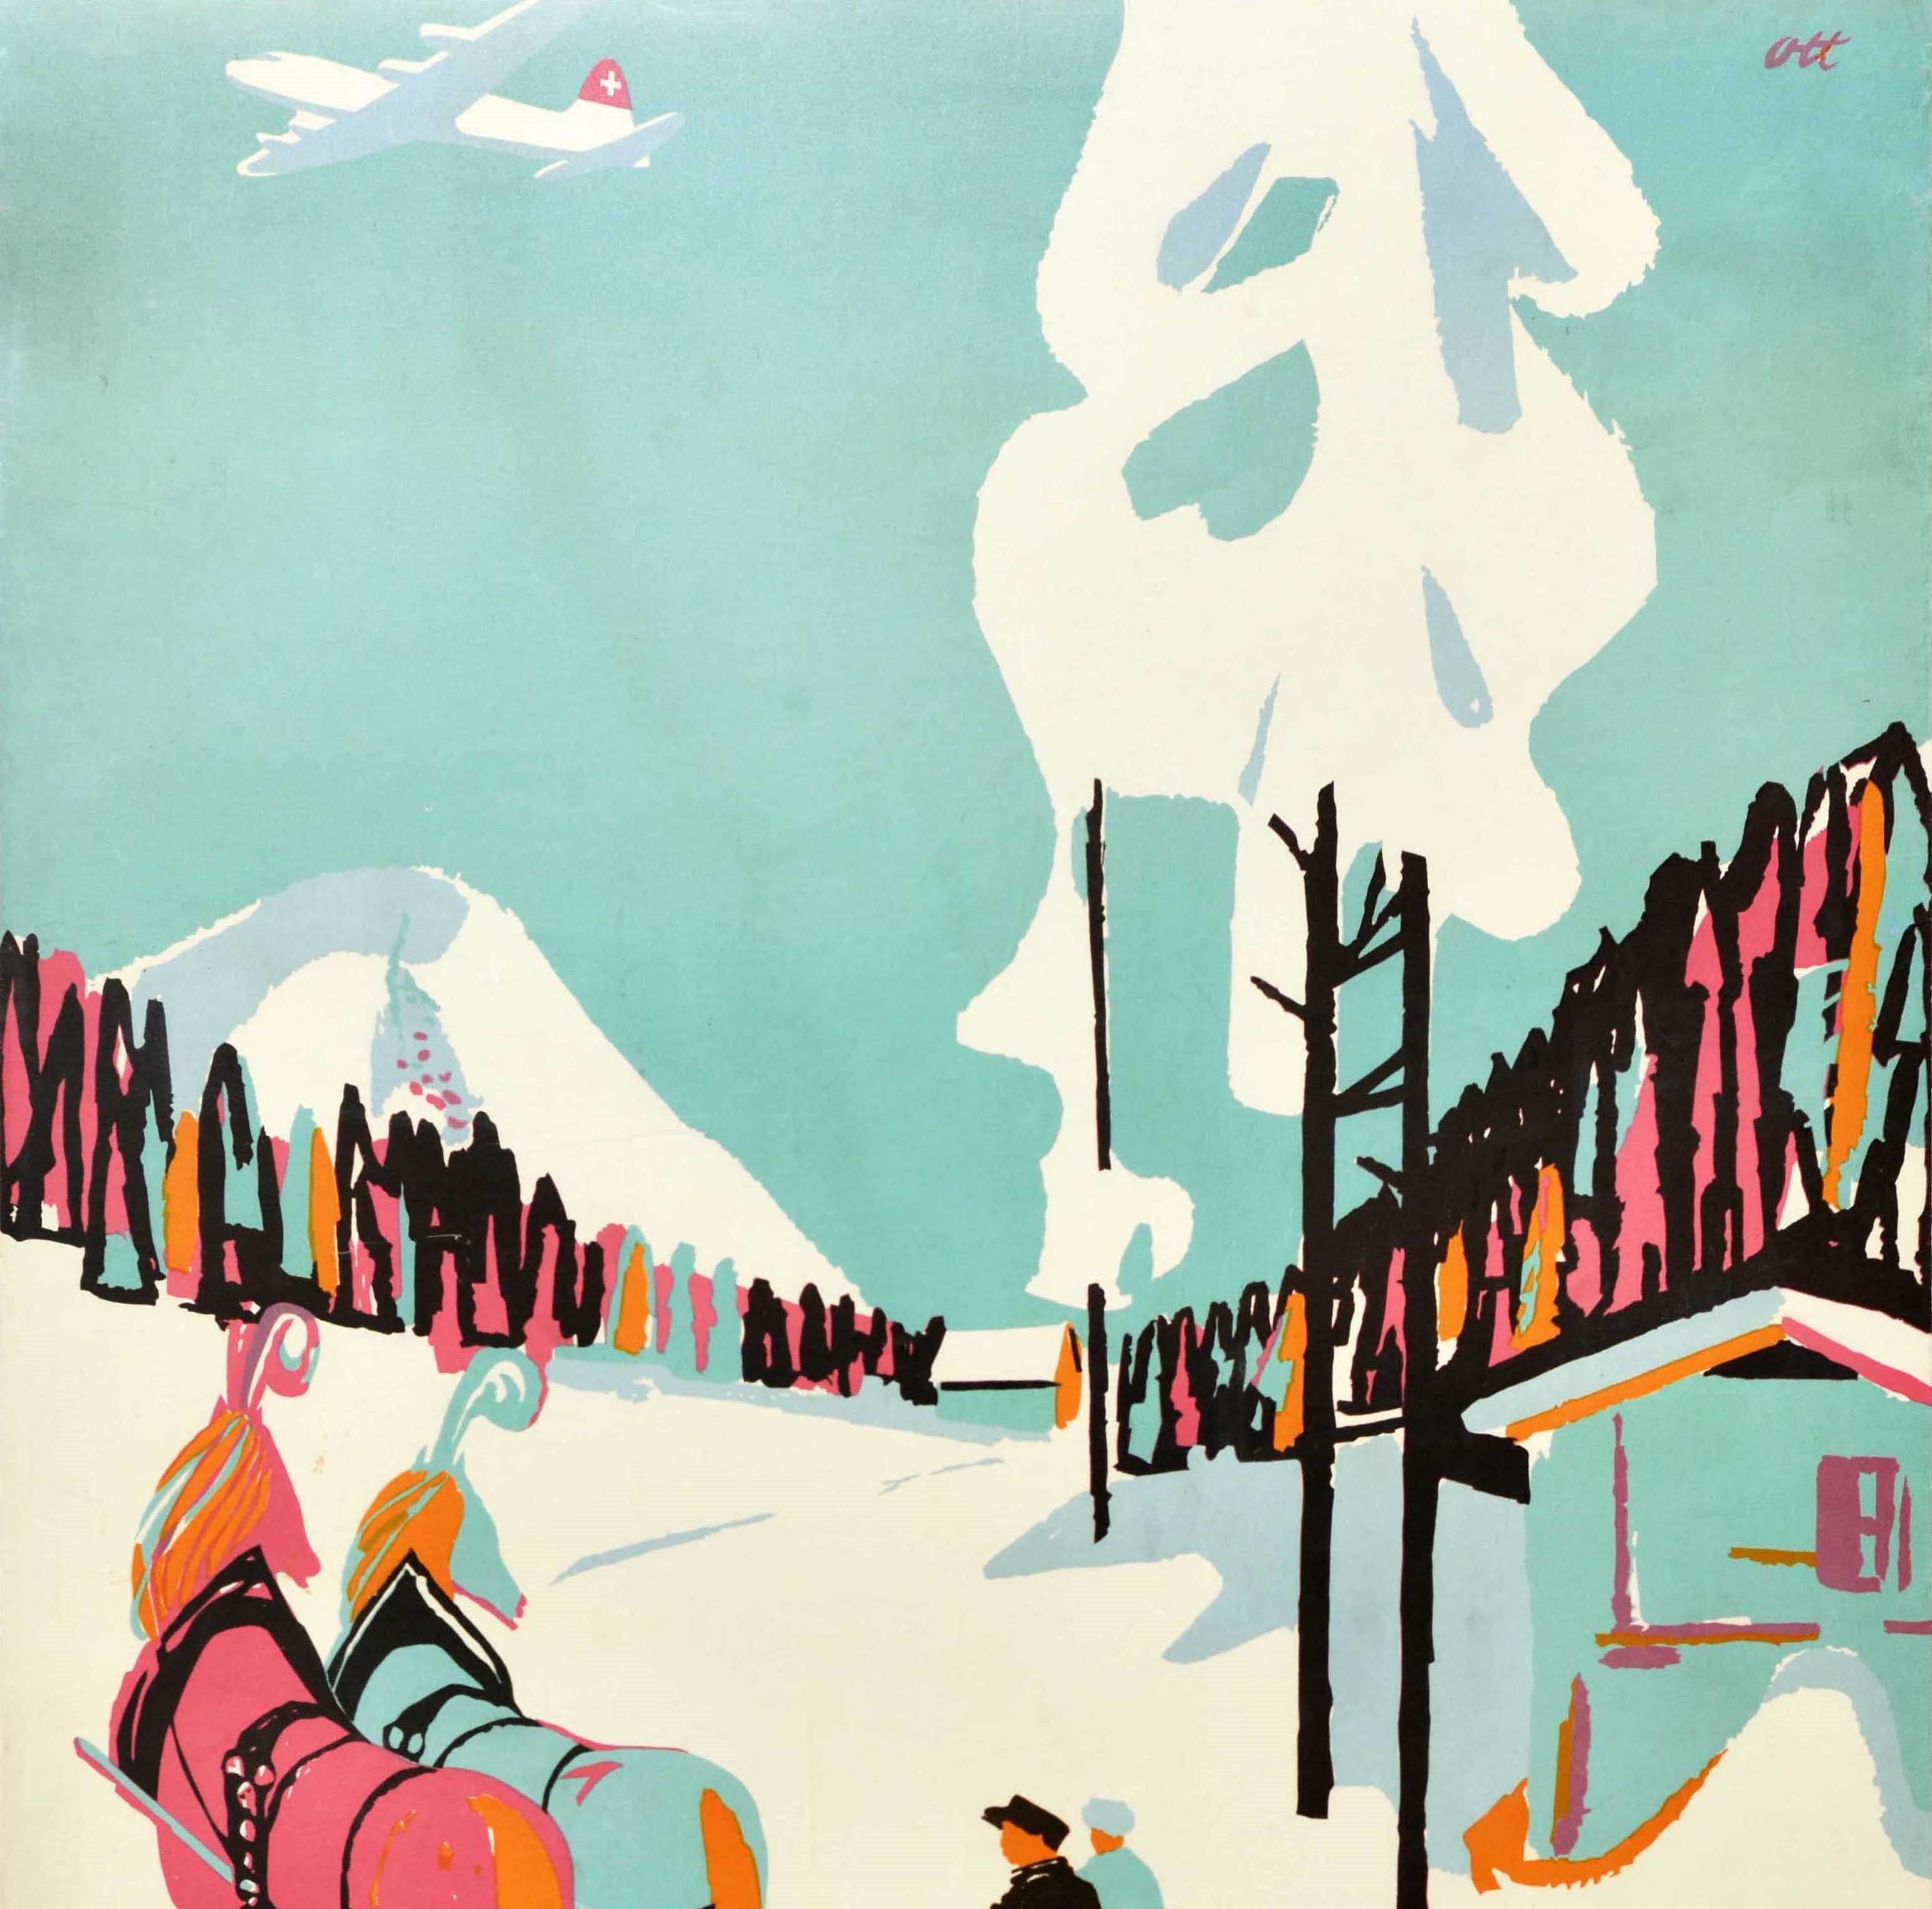 Original vintage travel poster - Winter sports in Switzerland? Of course, with Swissair / Sports d'hiver en Suisse? Bien entendu, avec la Swissair - featuring colourful artwork by Henri Ott (b.1919) depicting a scenic view of people on a horse drawn